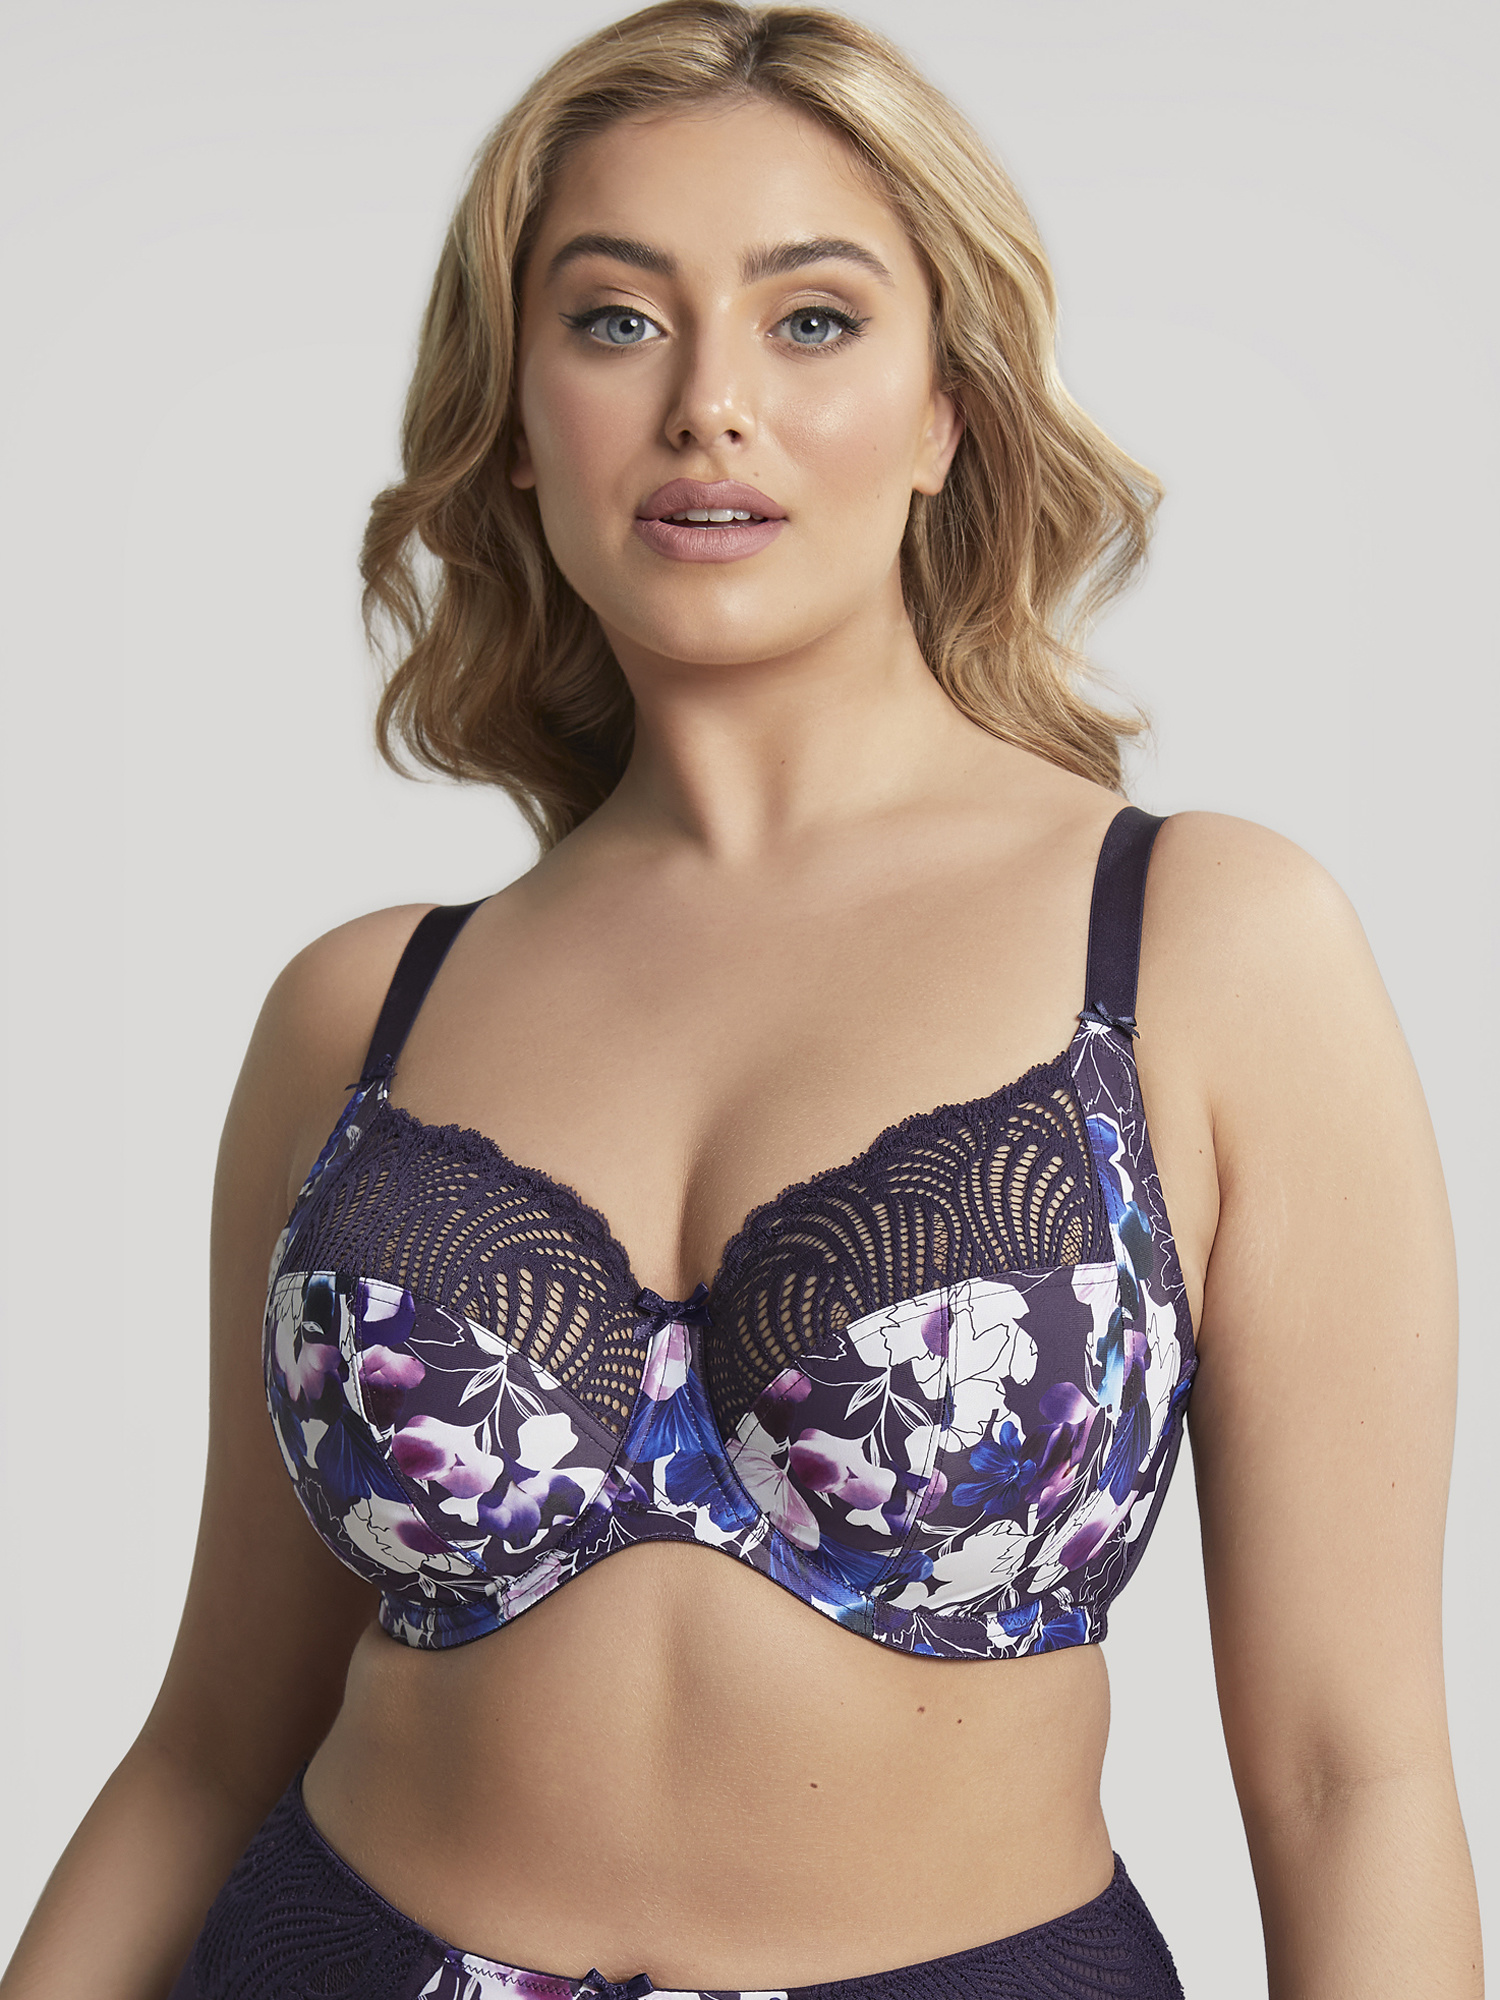 Panache Lingerie - Brighten up your lingerie drawer with the Sculptresse  Candi Full Cup Bra in this stunning Floral Print! A must have to take  through into Spring! bit.ly/2EpkzP4 #Sculptresse #Lingerie #Floral